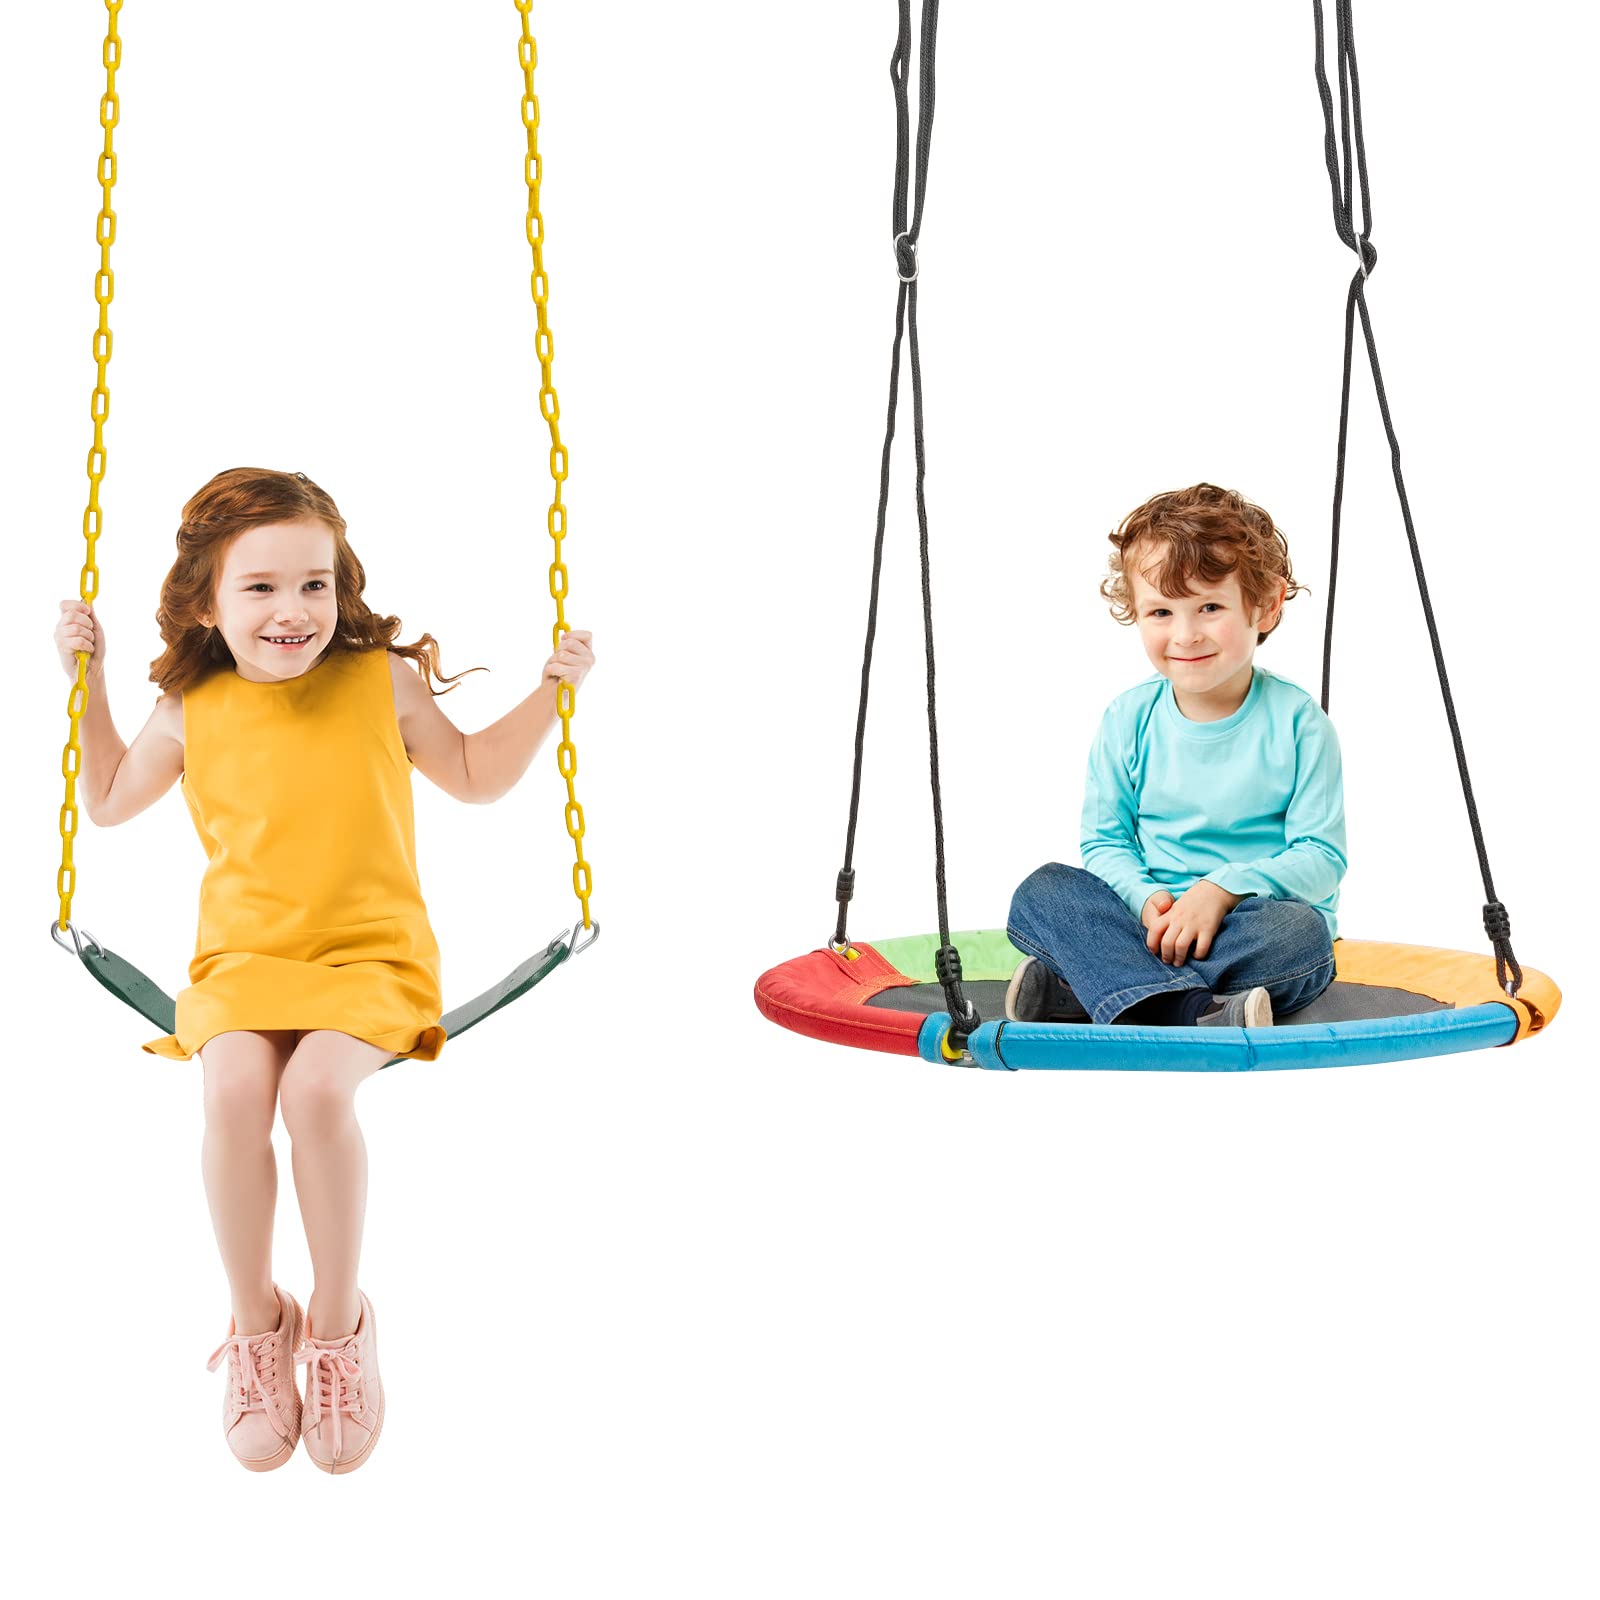 Goplus 40 Flying Saucer Tree Swing Indoor Outdoor Play Set Swing for Kids  colorful